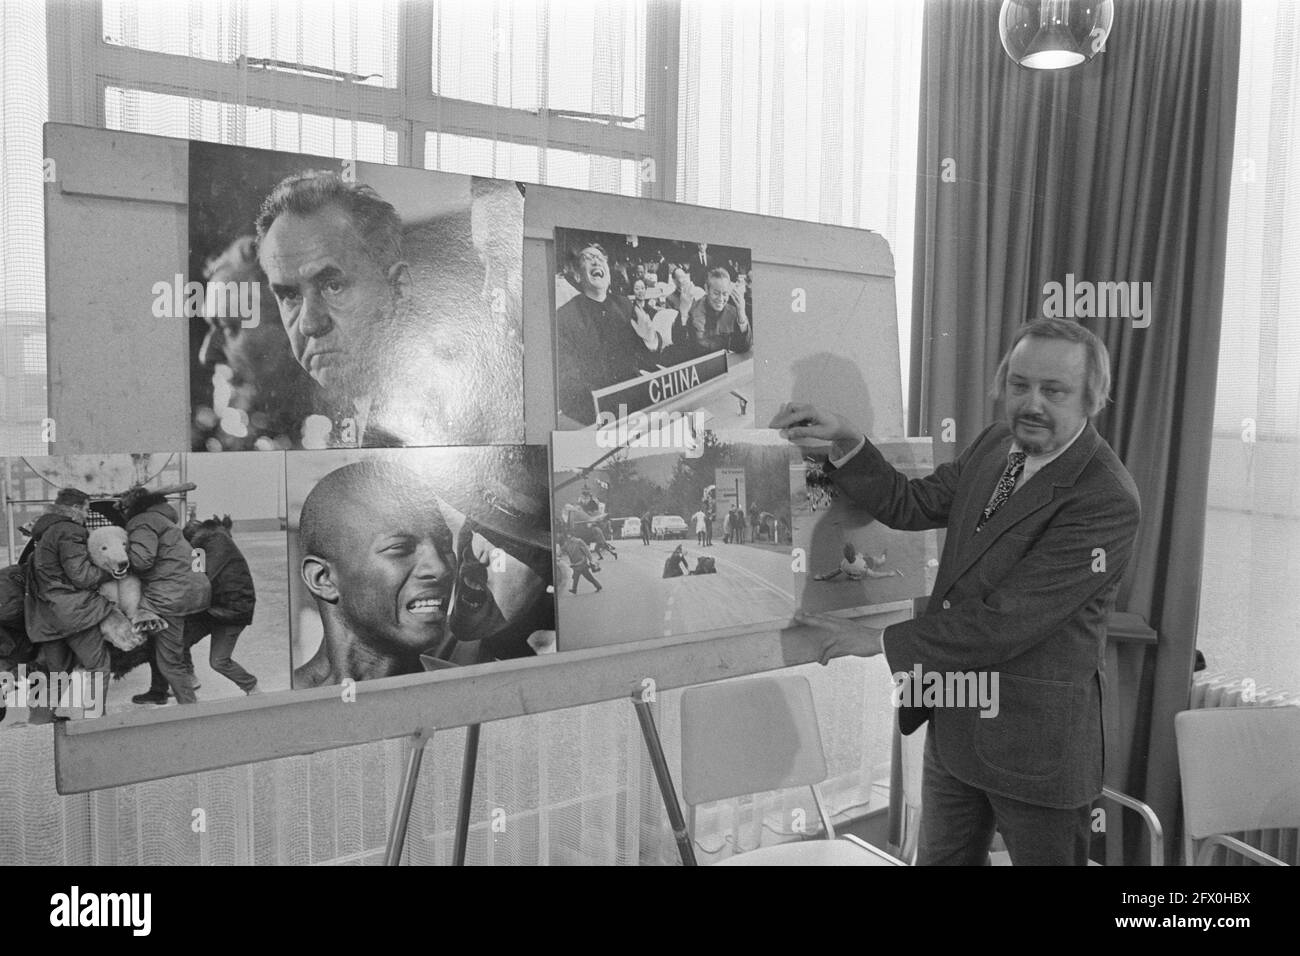 World Press Photo 1972, jury president Joop Swart holds up winning photo shot bank robber during press conference at Hilton hotel in Amsterdam, February 24, 1972, photography, press conferences, The Netherlands, 20th century press agency photo, news to remember, documentary, historic photography 1945-1990, visual stories, human history of the Twentieth Century, capturing moments in time Stock Photo